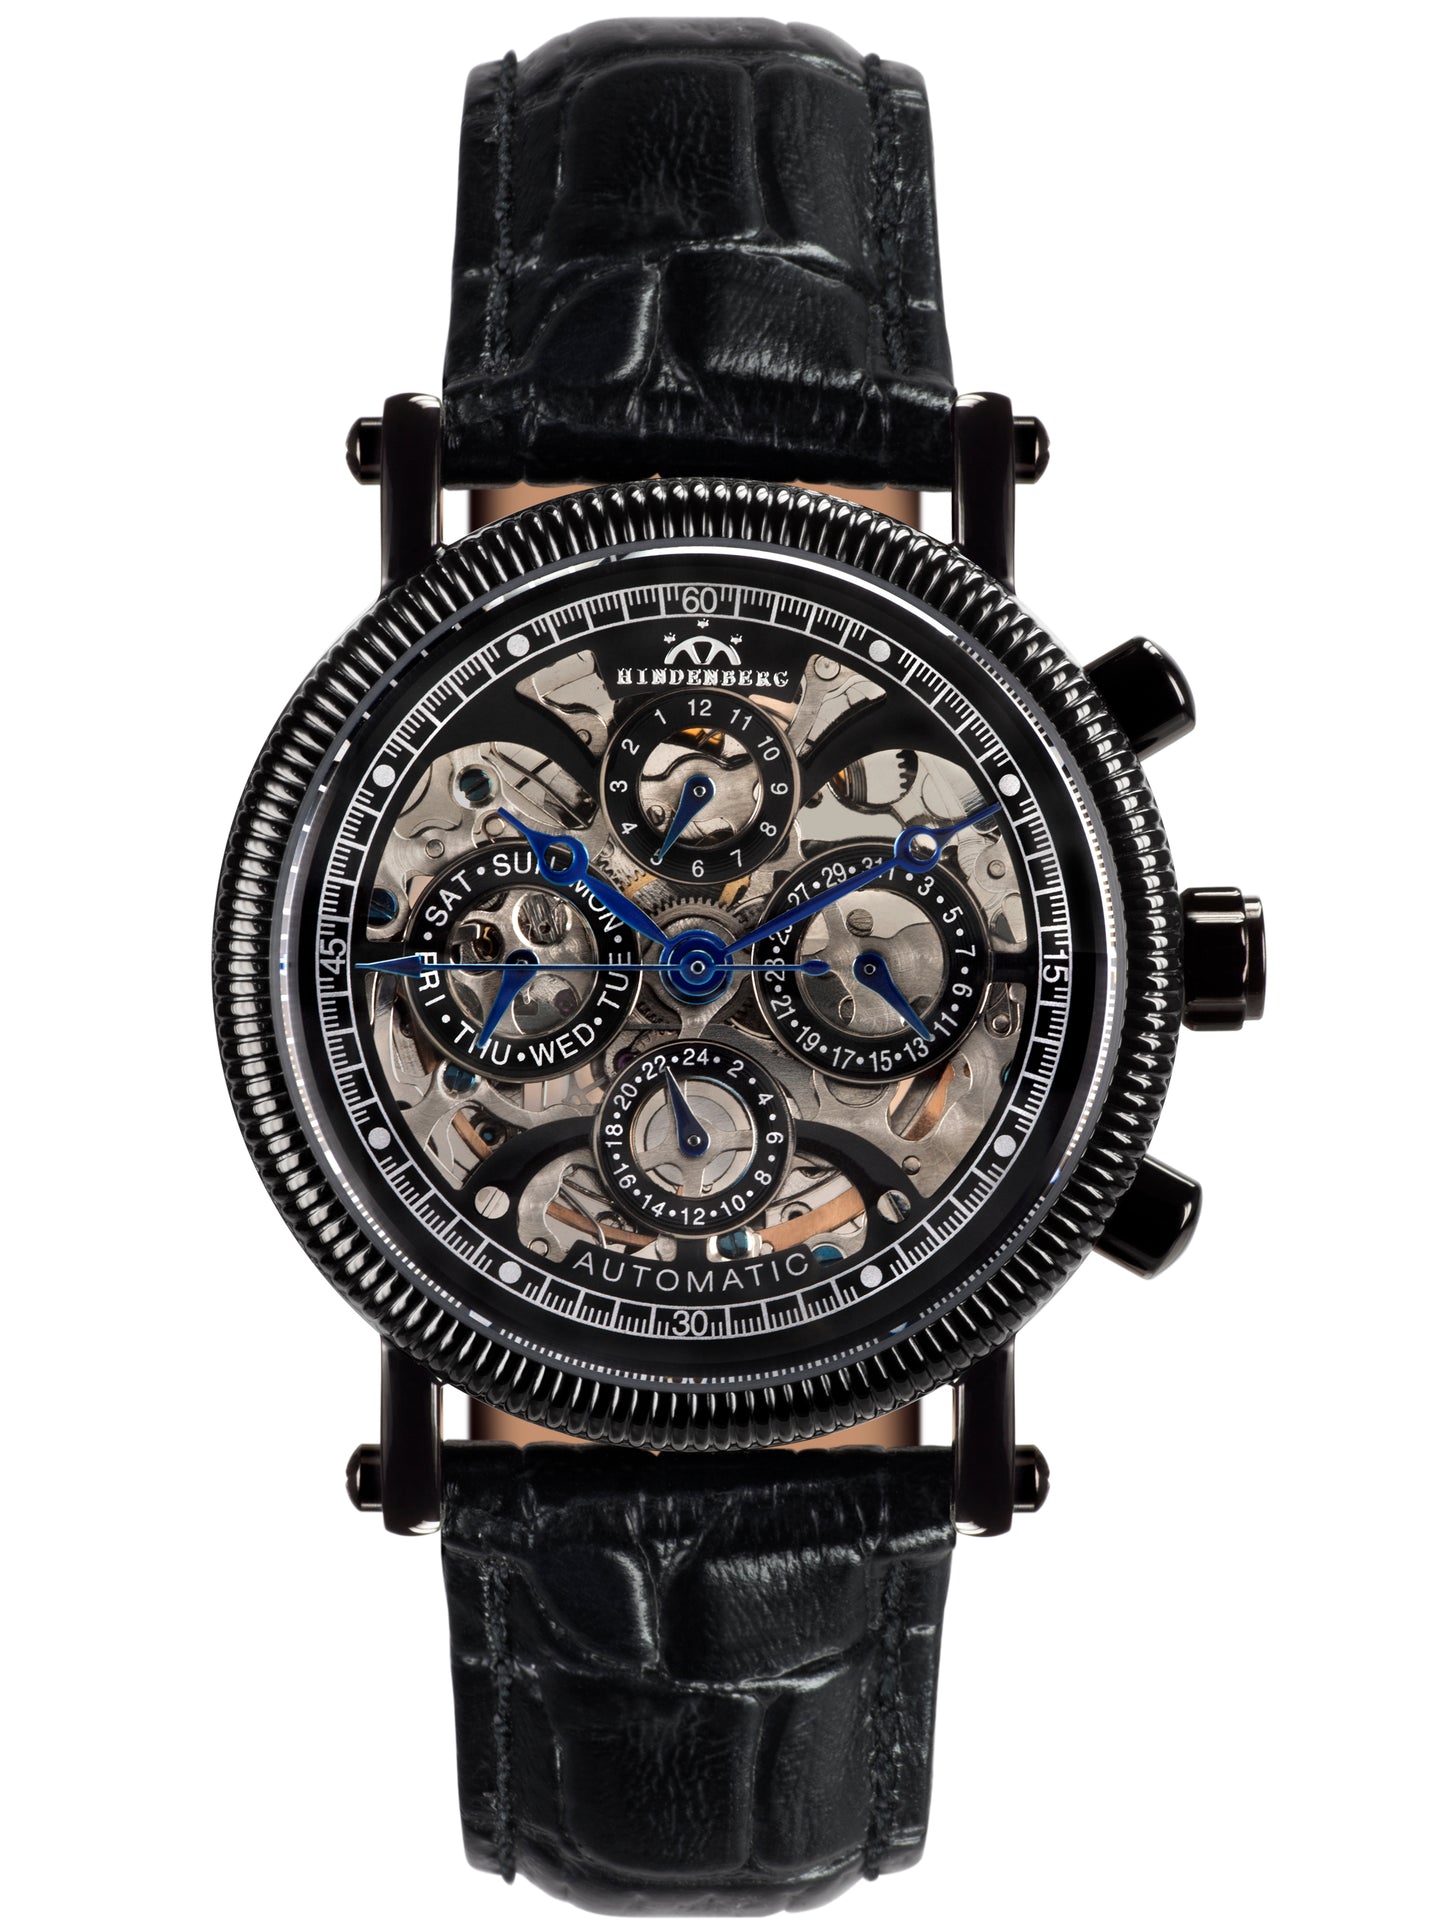 Automatic watches — Skeleton — Hindenberg — PVD Black